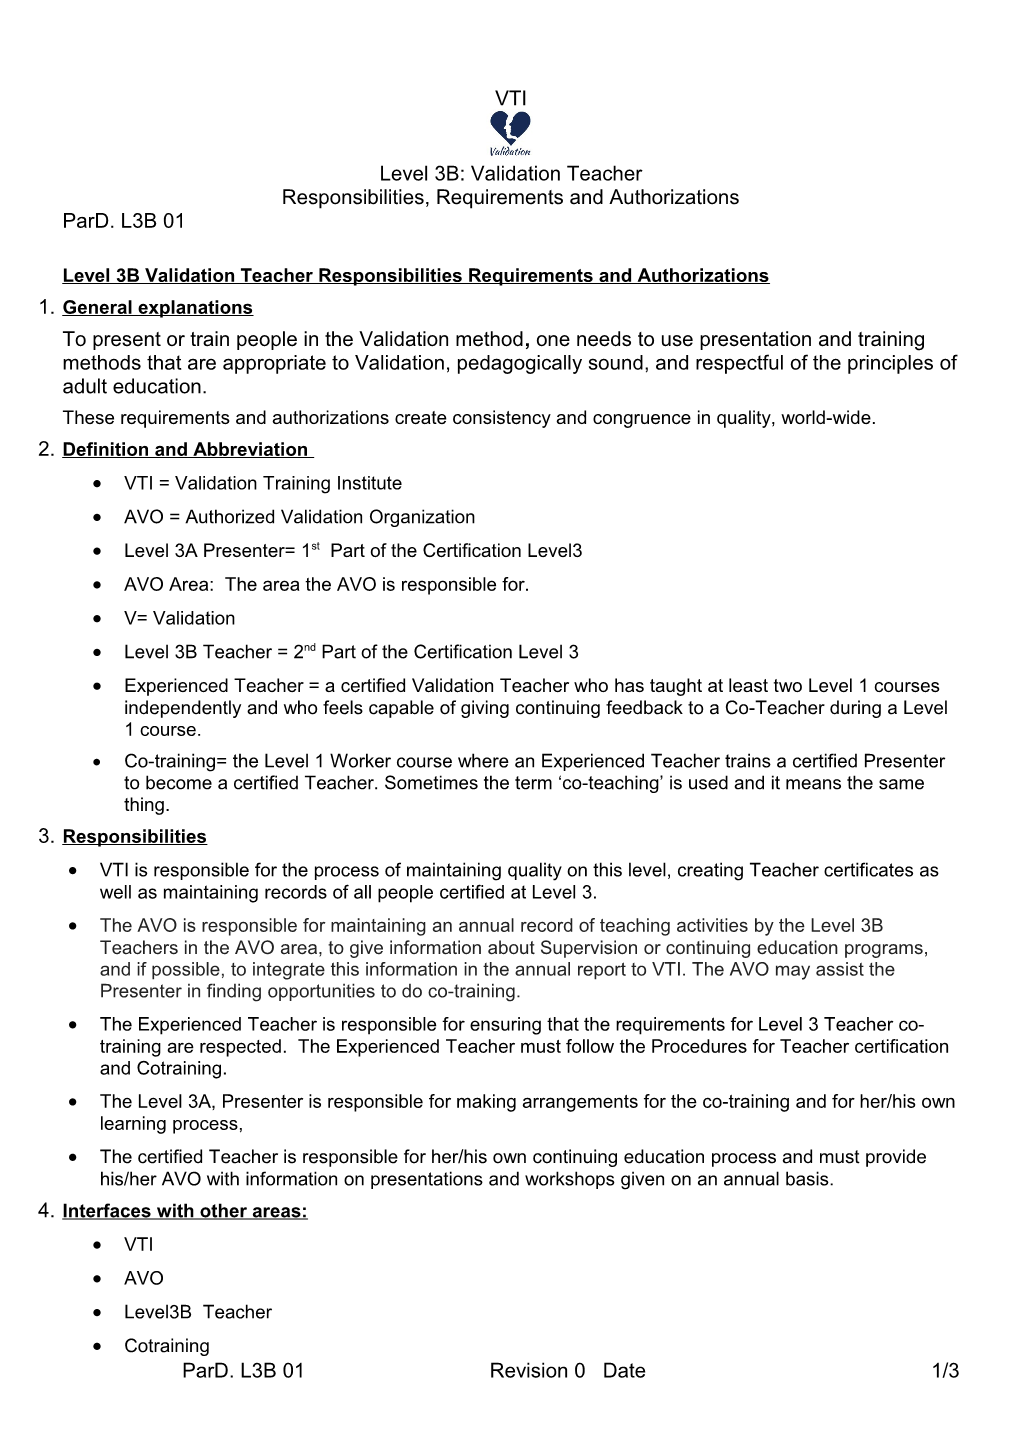 Level 3B Validation Teacher Responsibilities Requirements and Authorizations